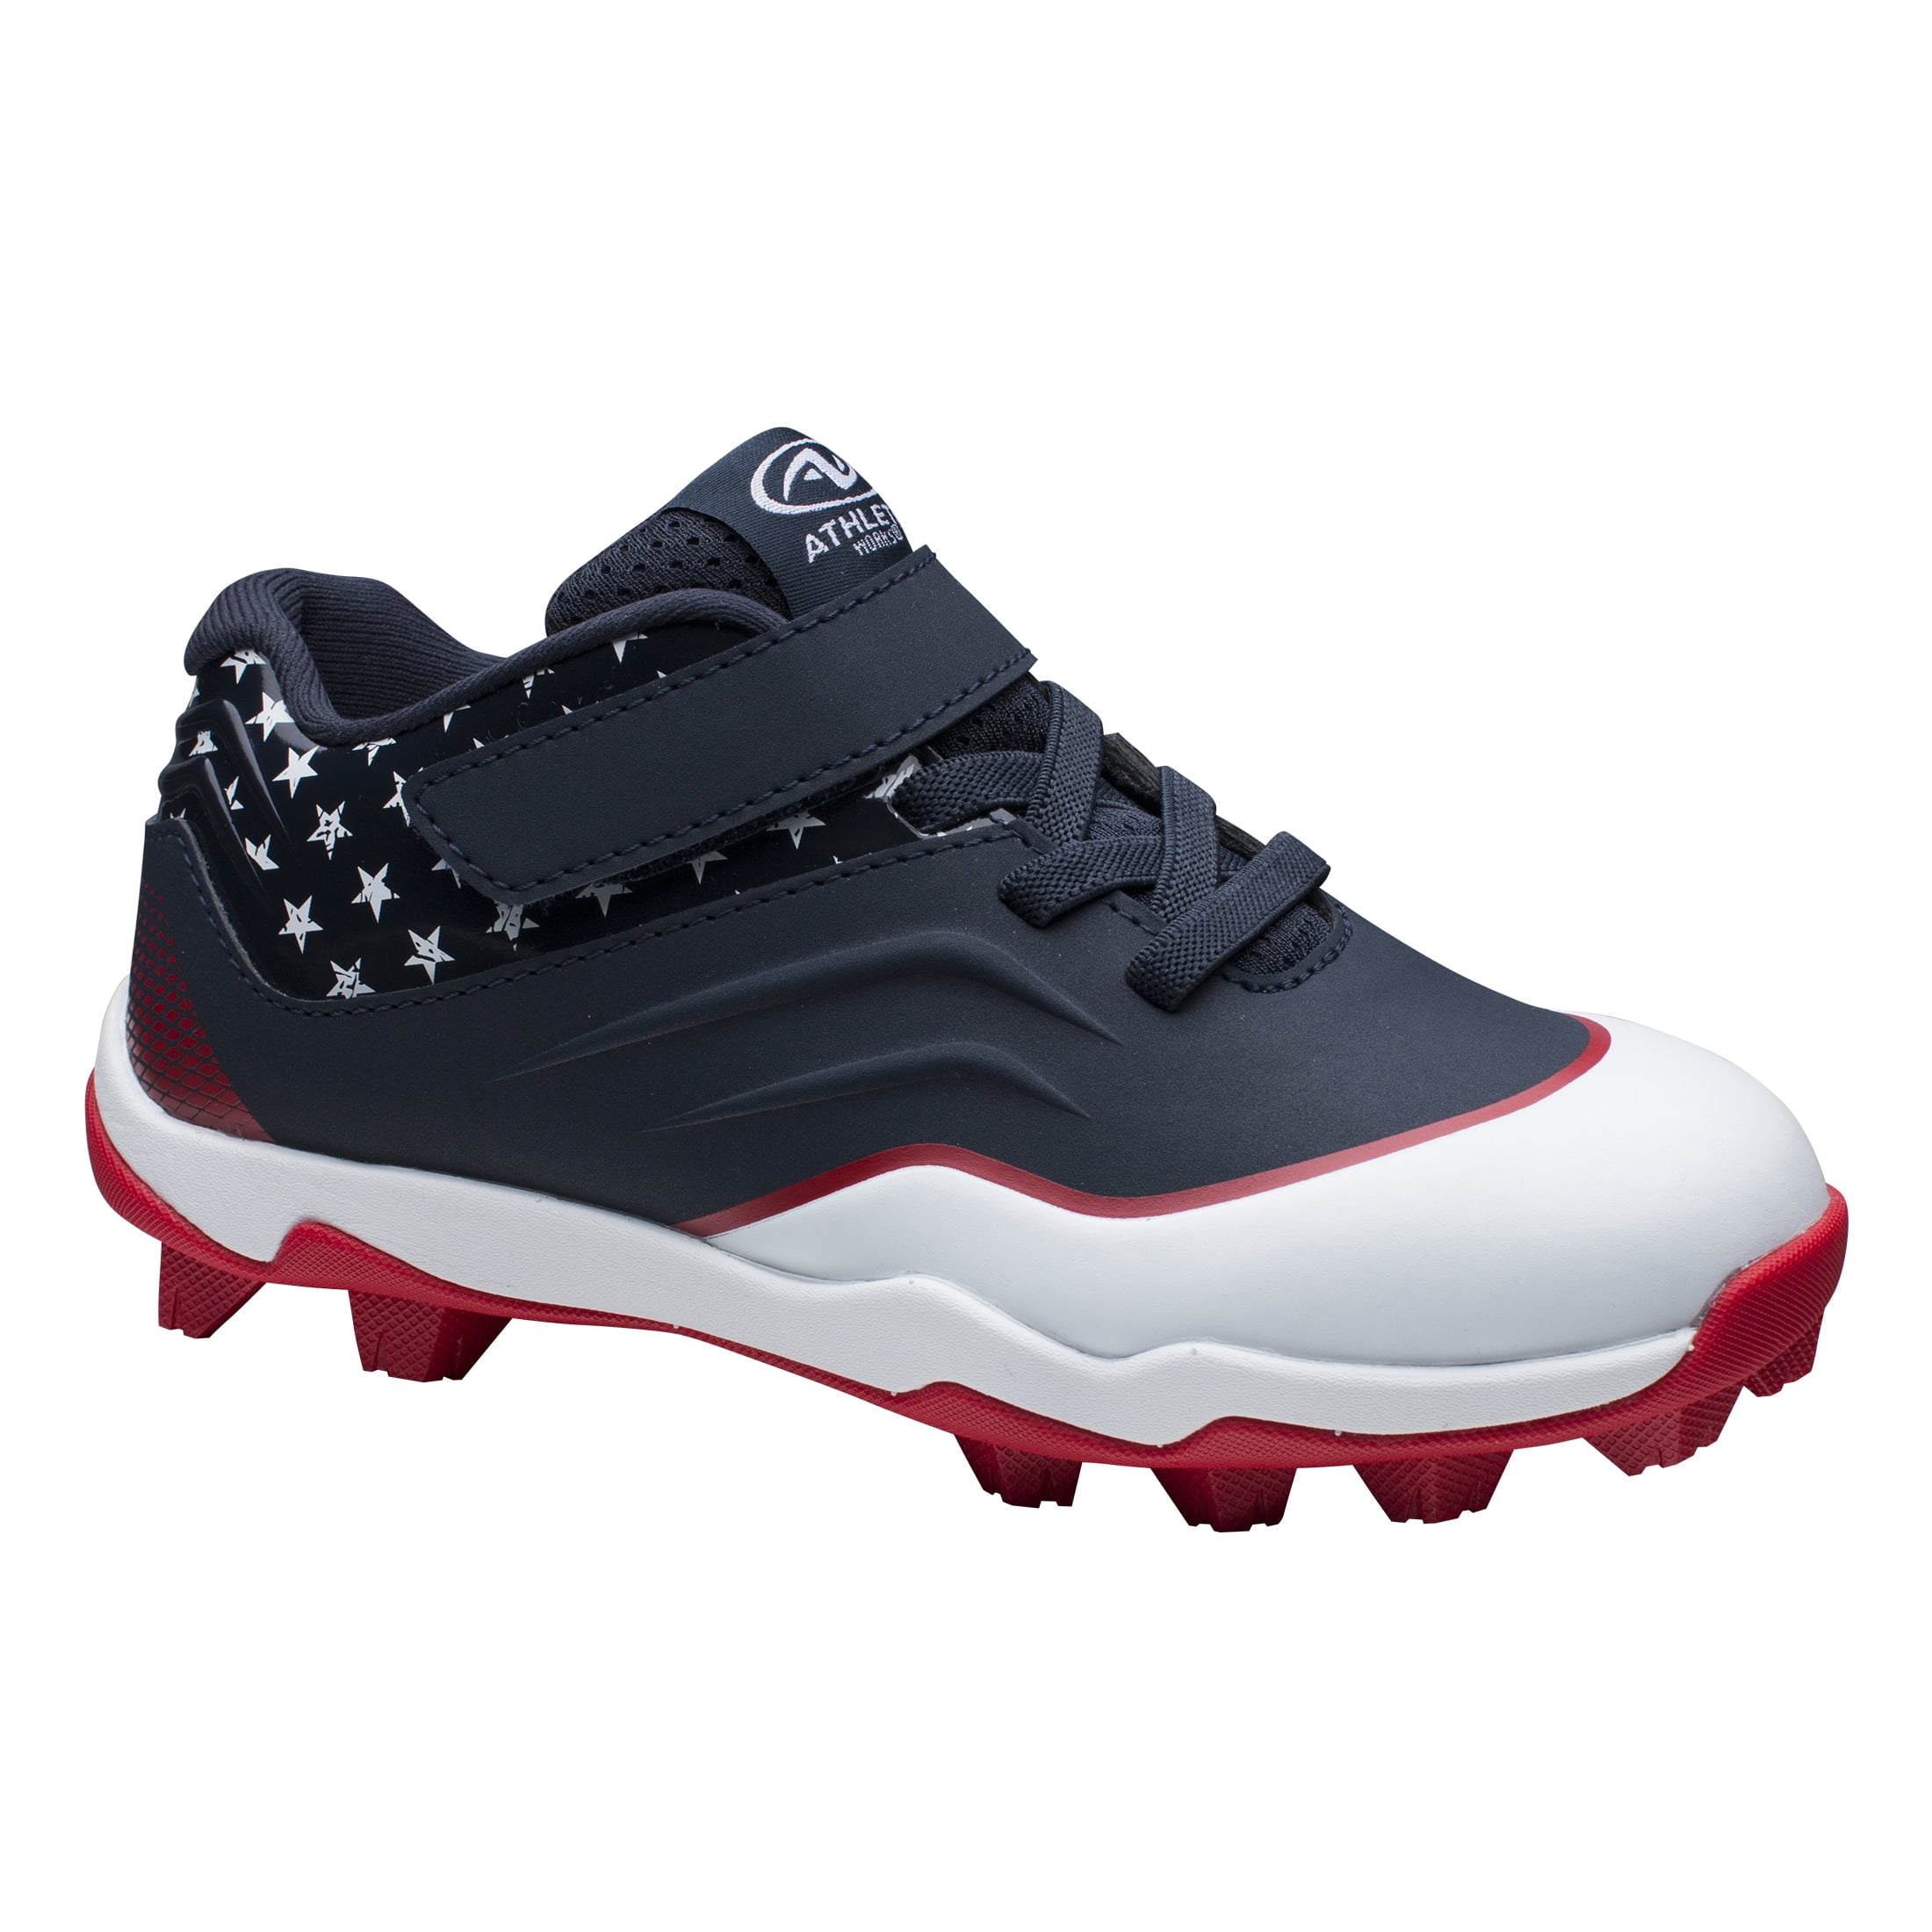 Franklin Tournament Baseball Cleats Boys Youth Size 13 for sale online 